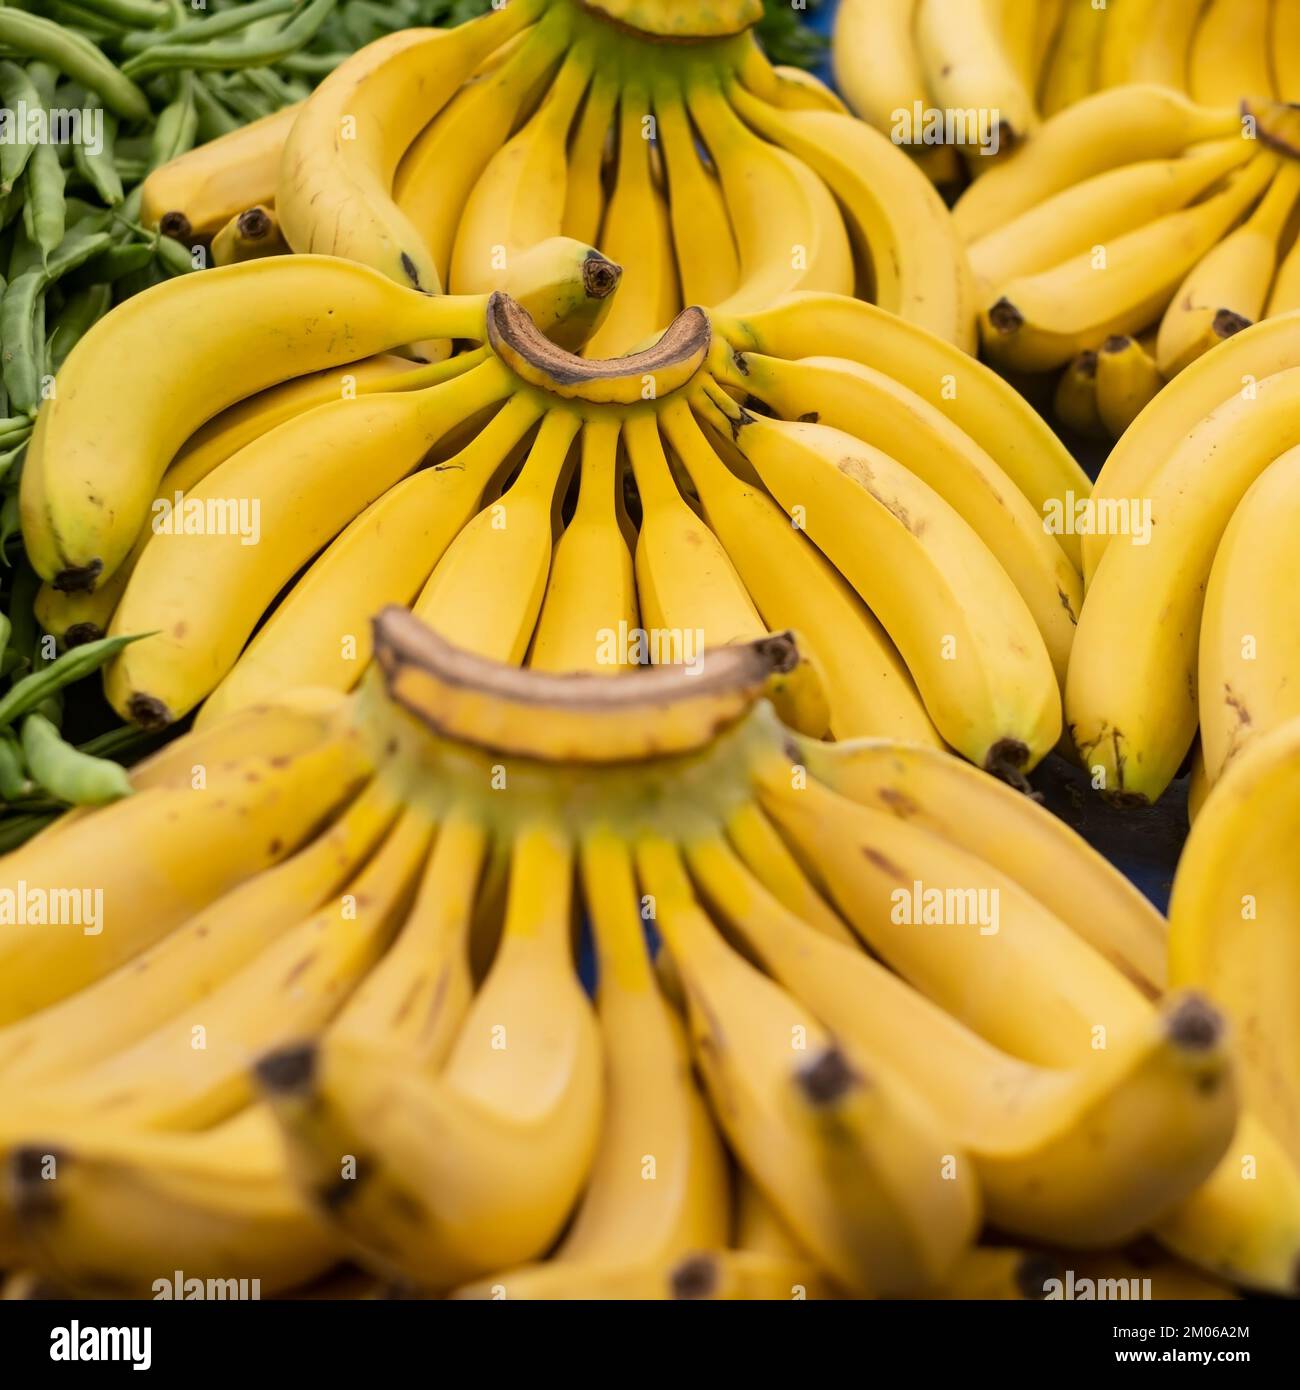 Bunch of ripened bananas at grocery store Stock Photo